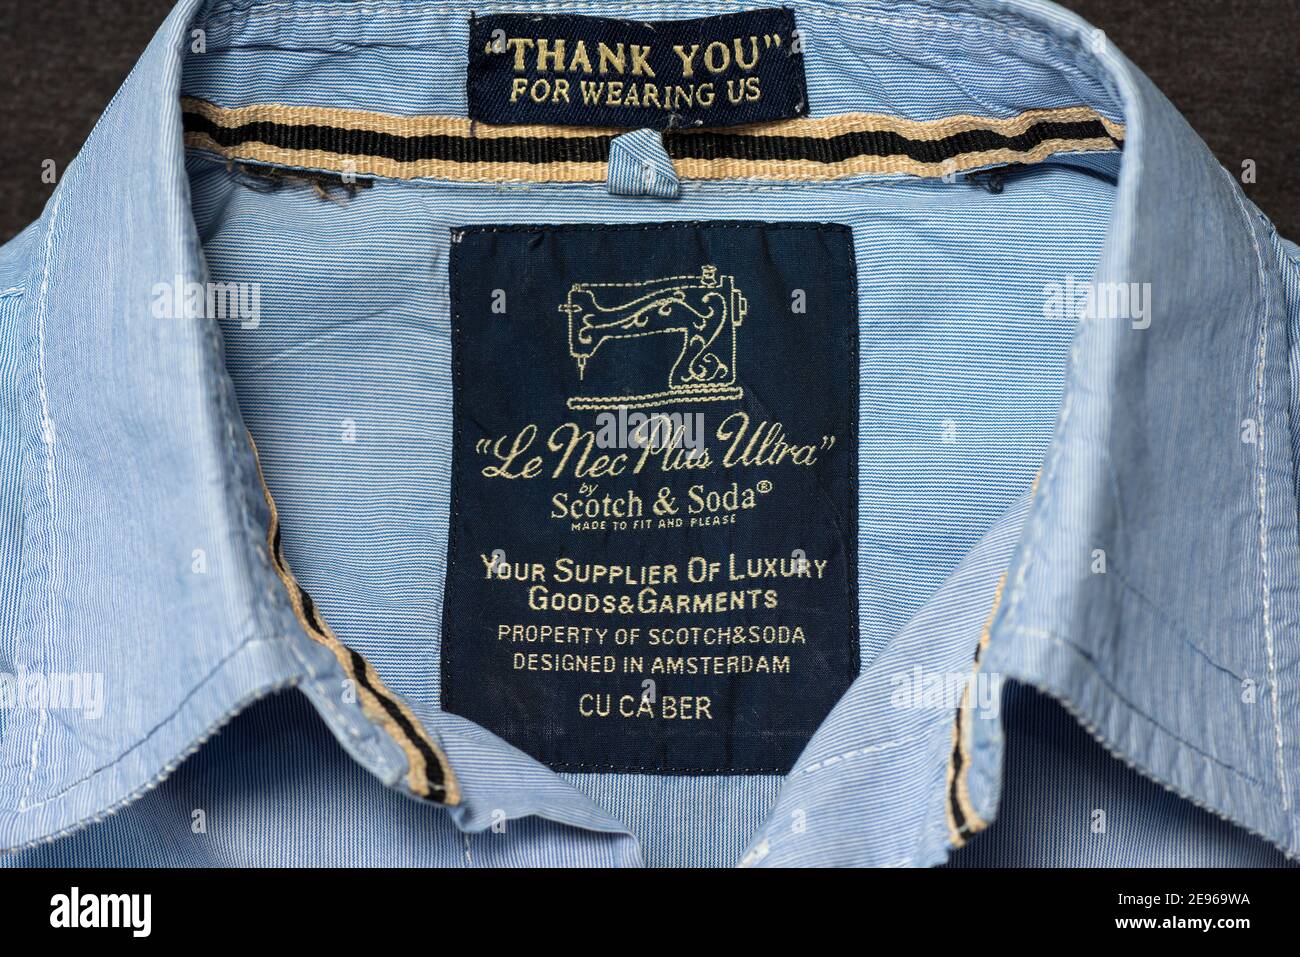 Le Nec Plus Ultra" by Scotch & Soda menswear vintage clothing label with  slogan and motto on blue shirt Stock Photo - Alamy